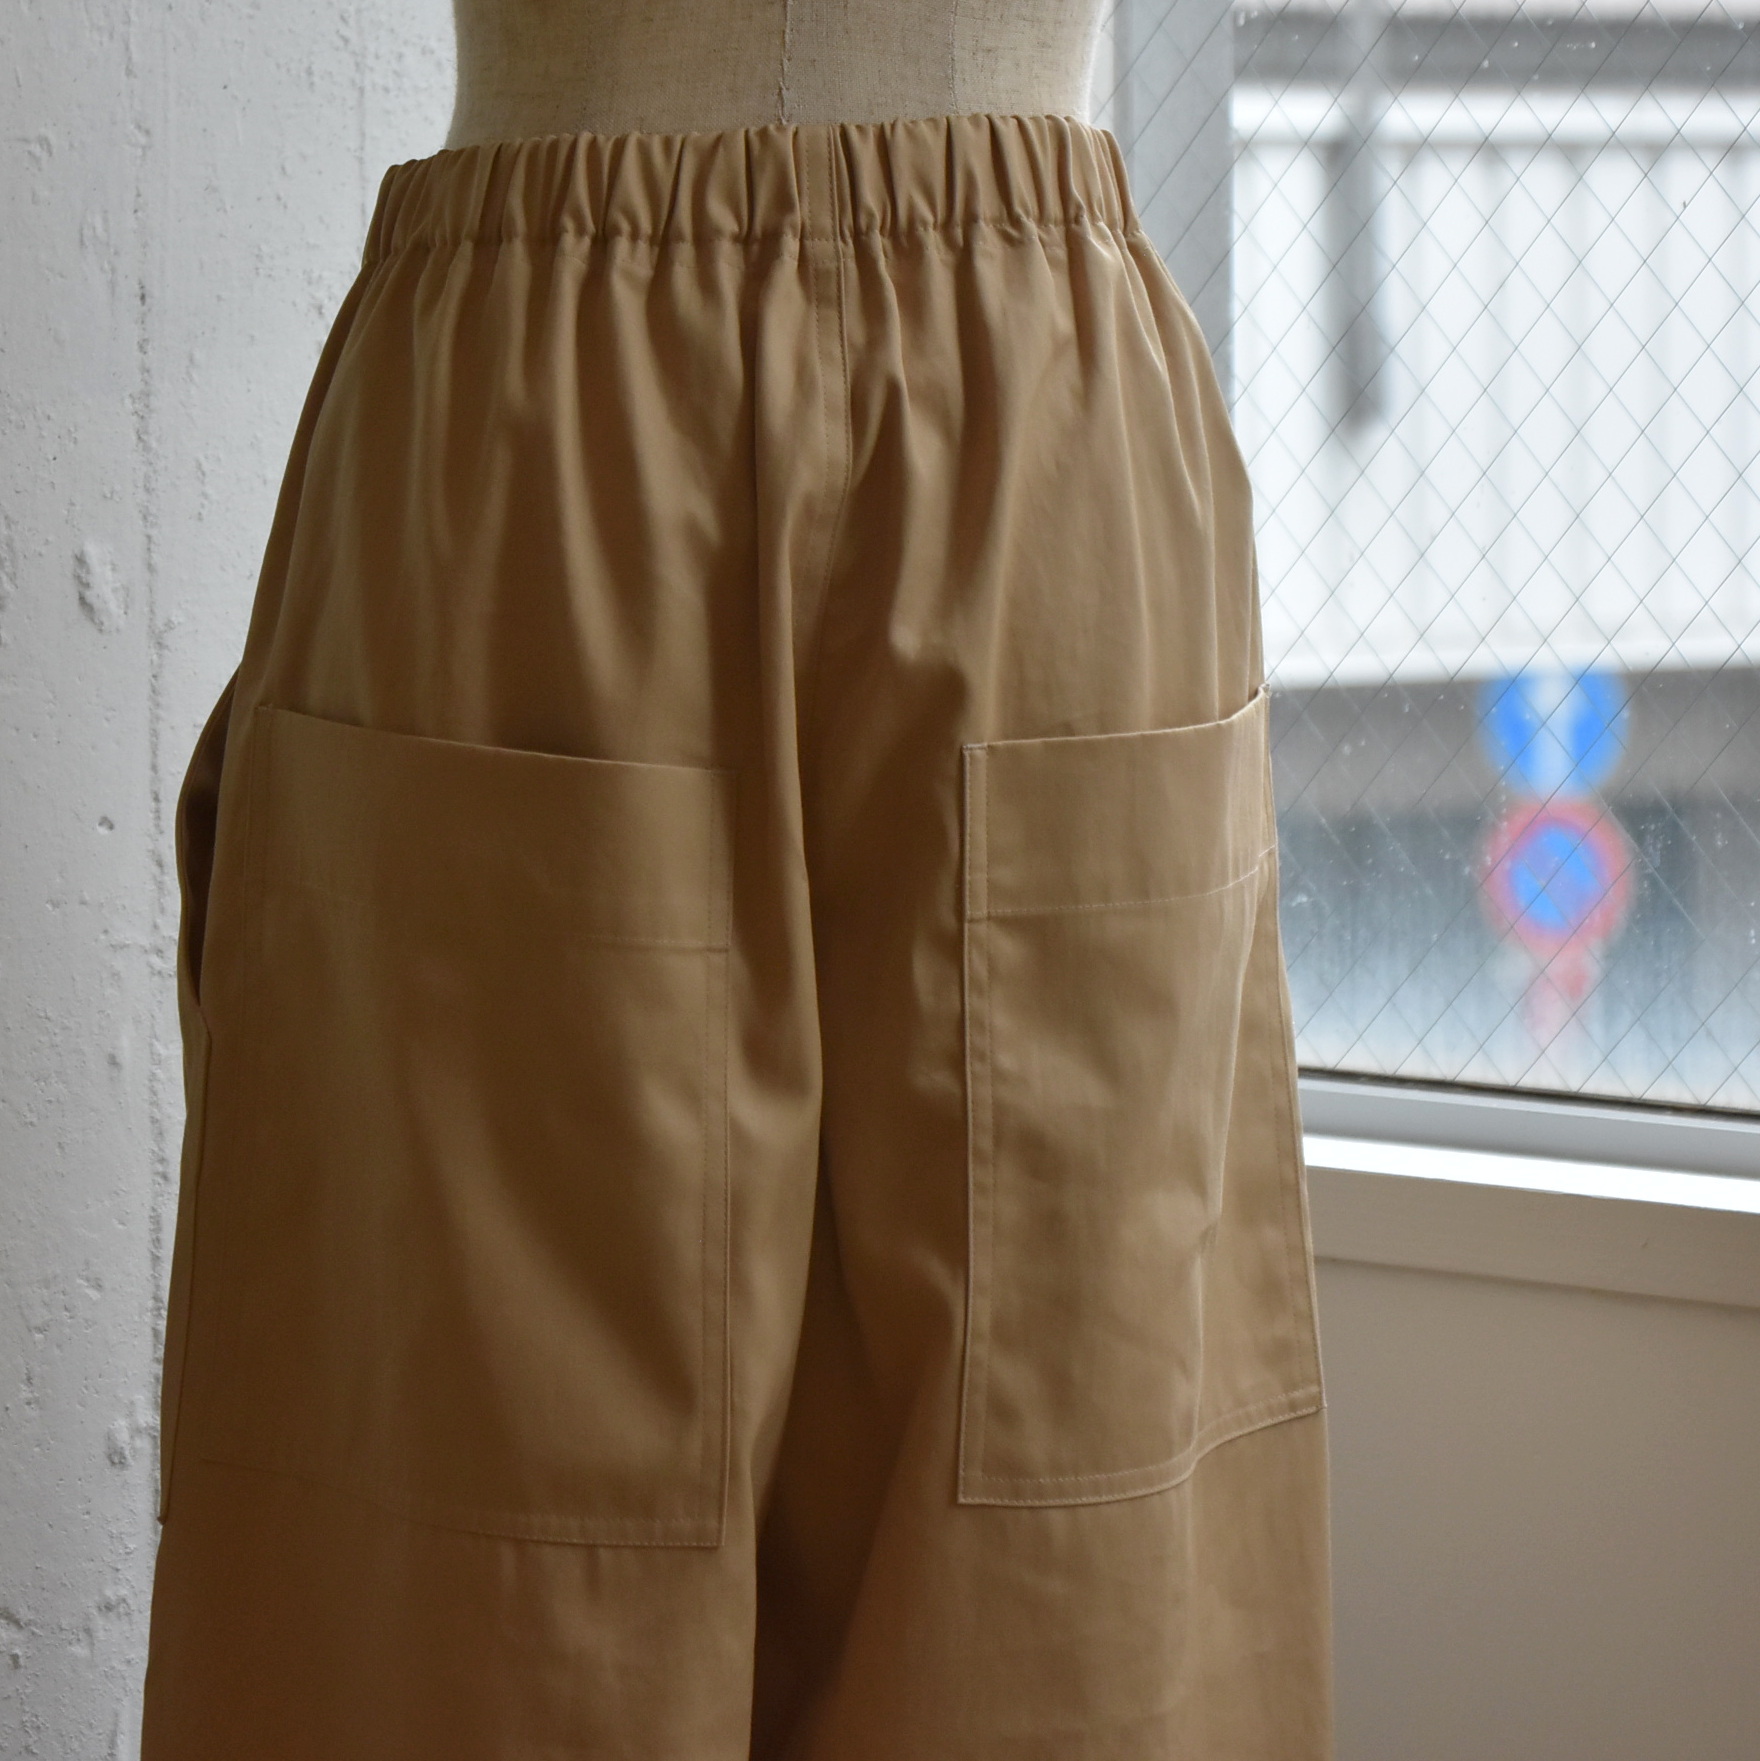 SOFIE D'HOORE(ソフィードール) / POWER Wide pants with big patched pockets(4)